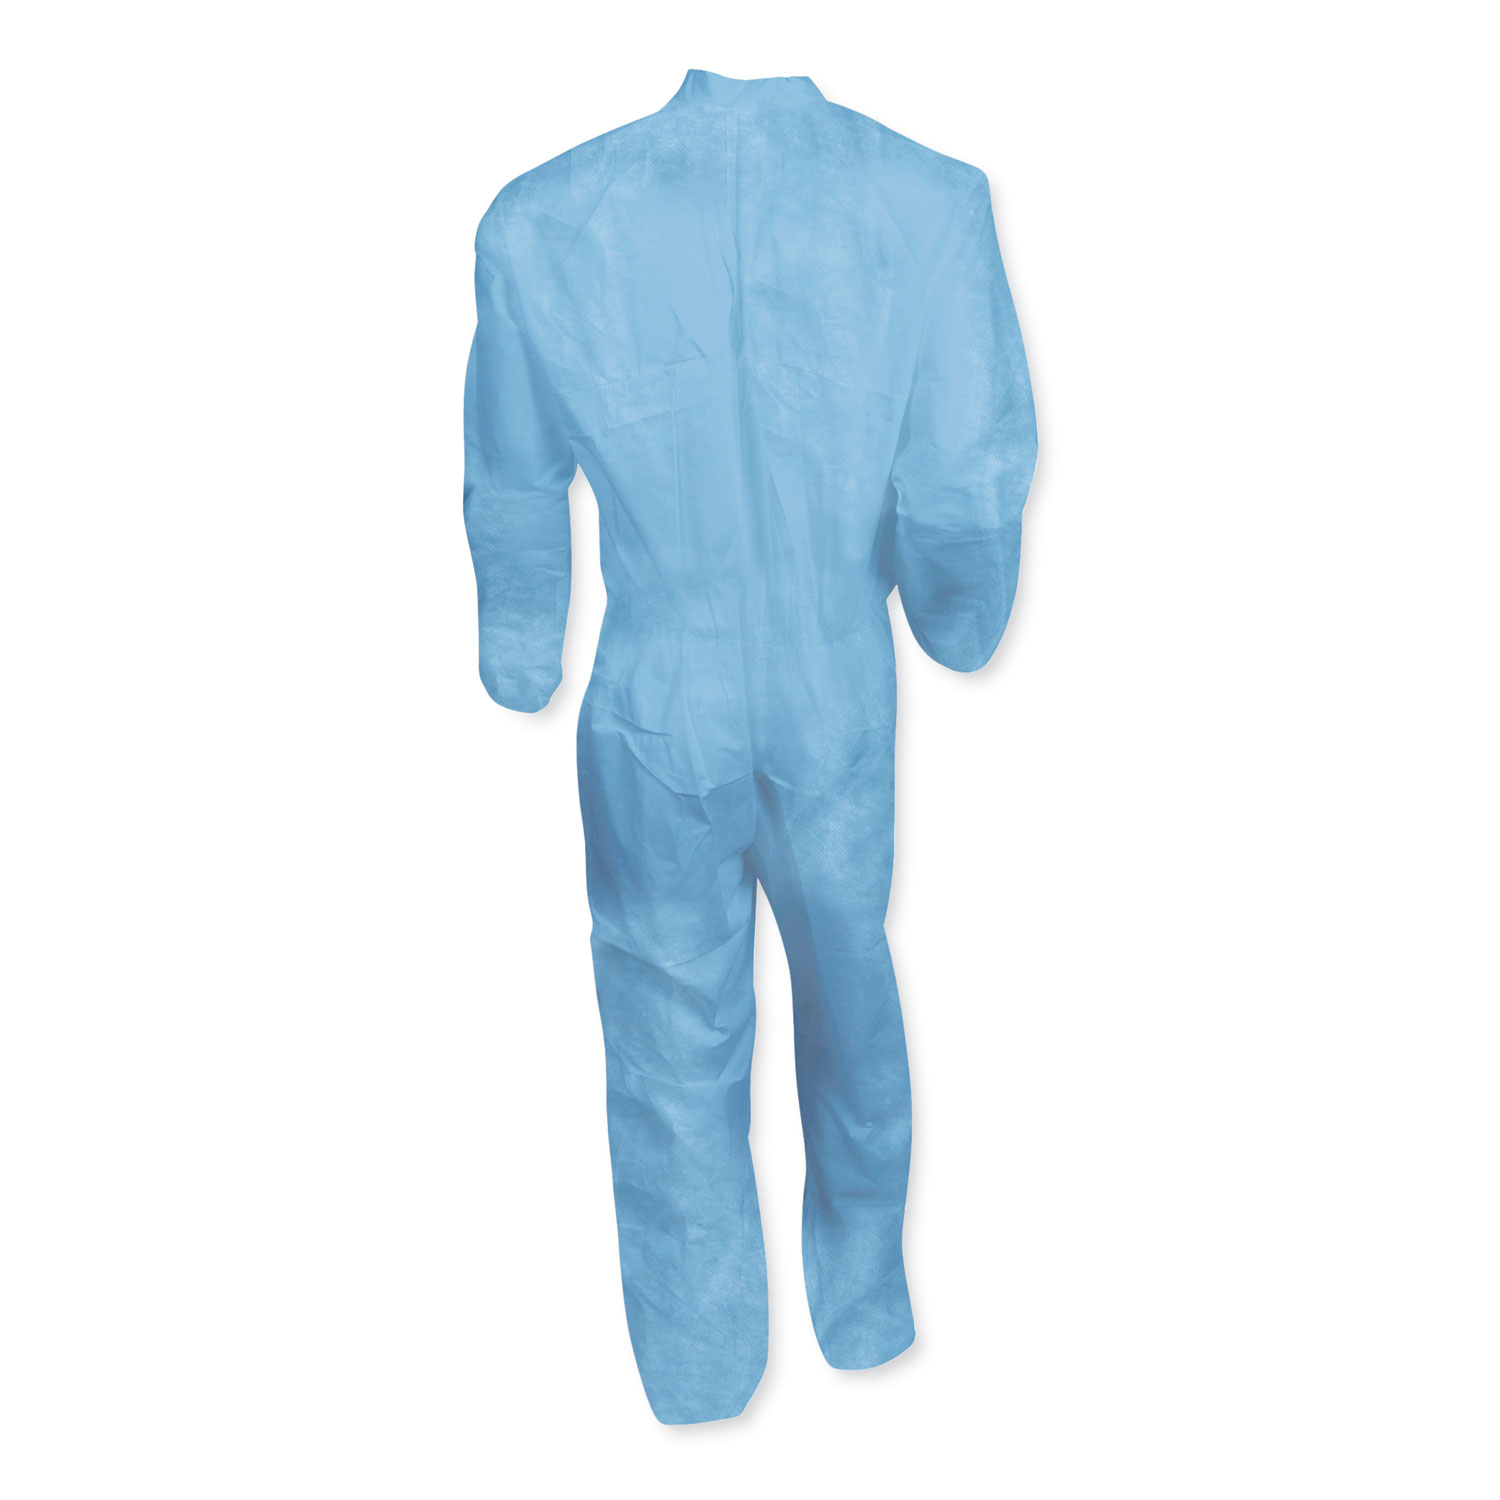 A65 Flame Resistant Coveralls, 2X-Large, Blue